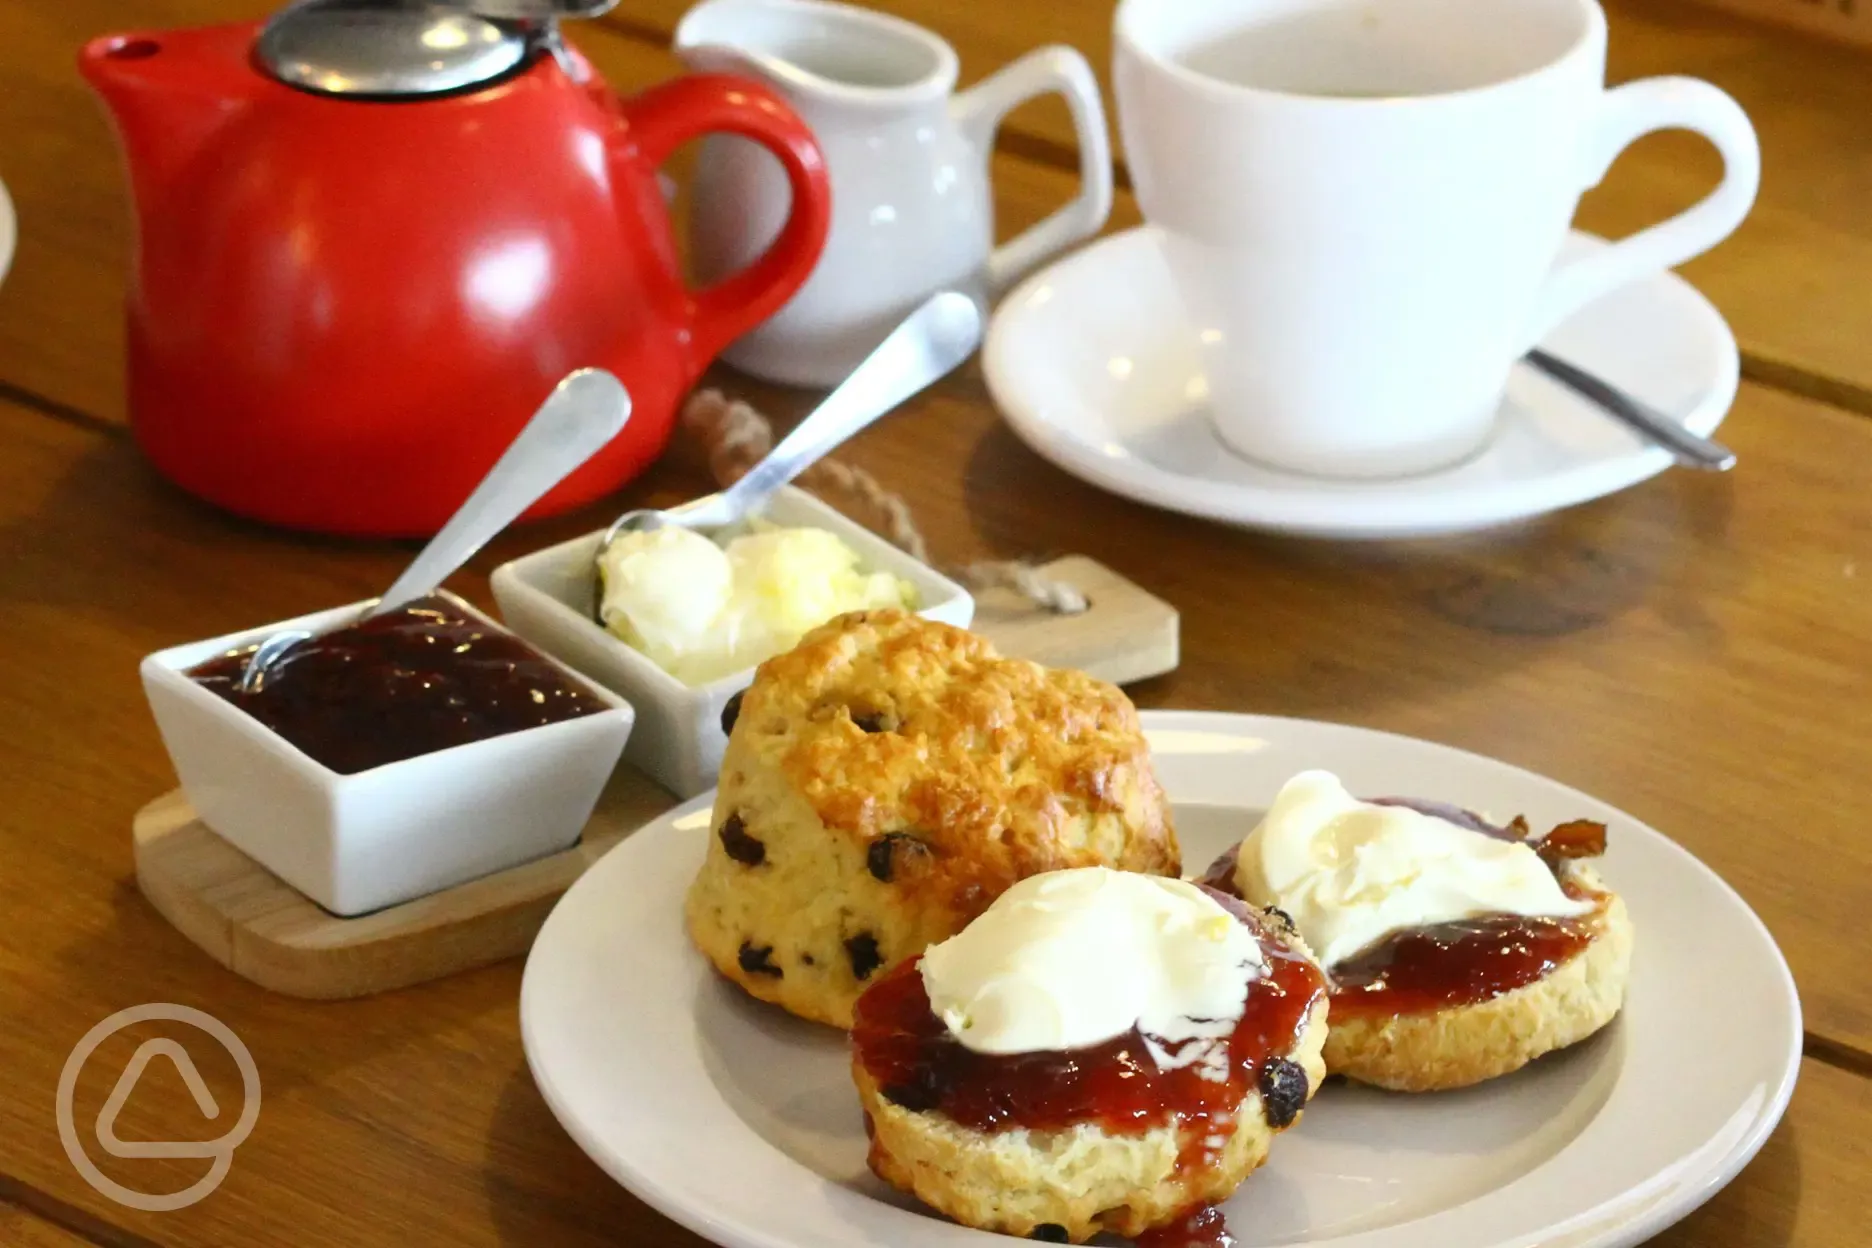 Cream teas available from the cafe